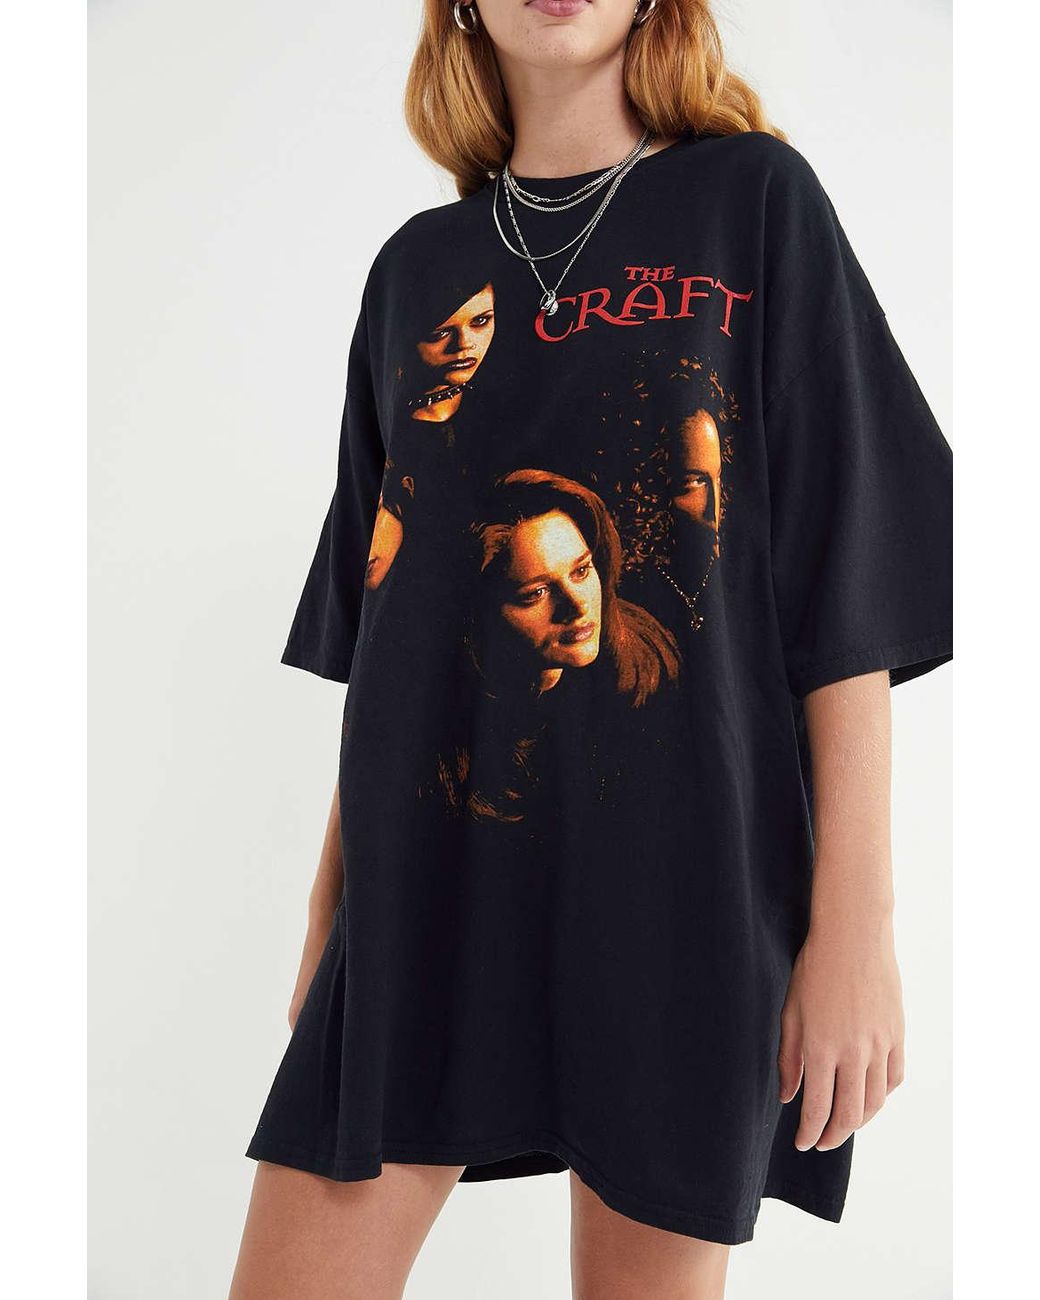 Urban Outfitters The Craft Oversized T-shirt Dress in Black | Lyst